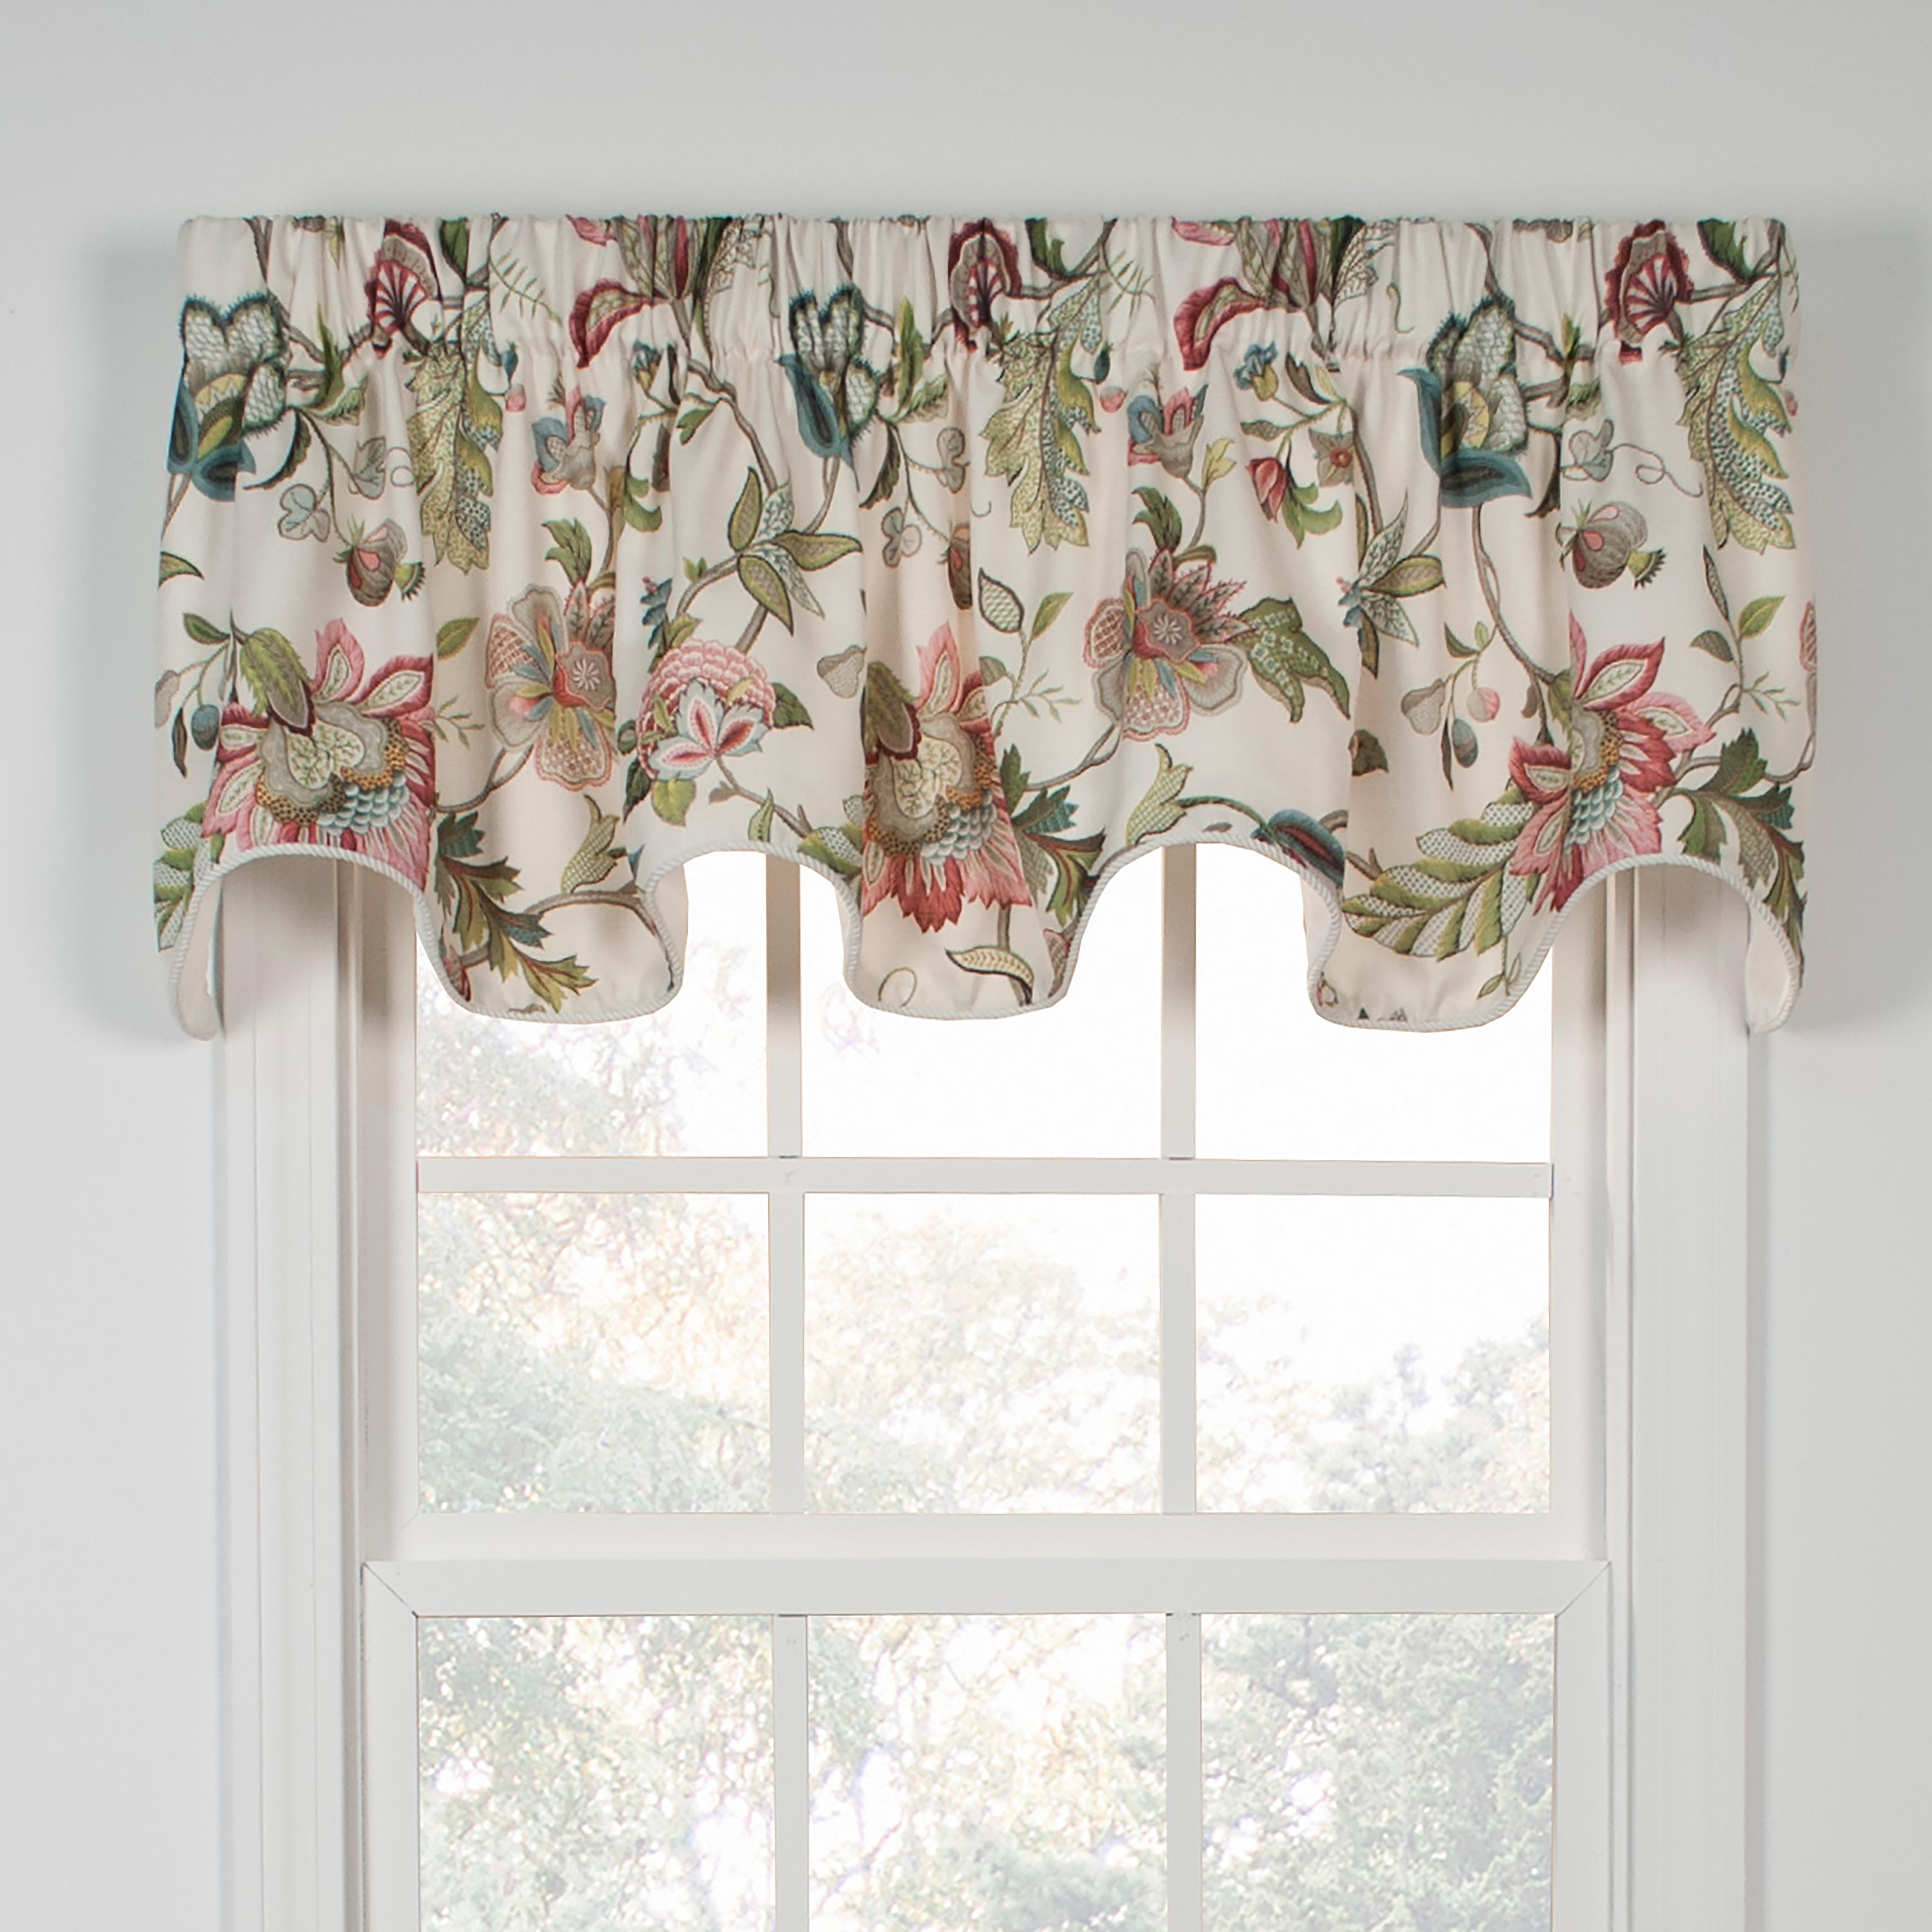 Scalloped Valance in Brooklyn Ocean Jacobean Floral, Large Scale